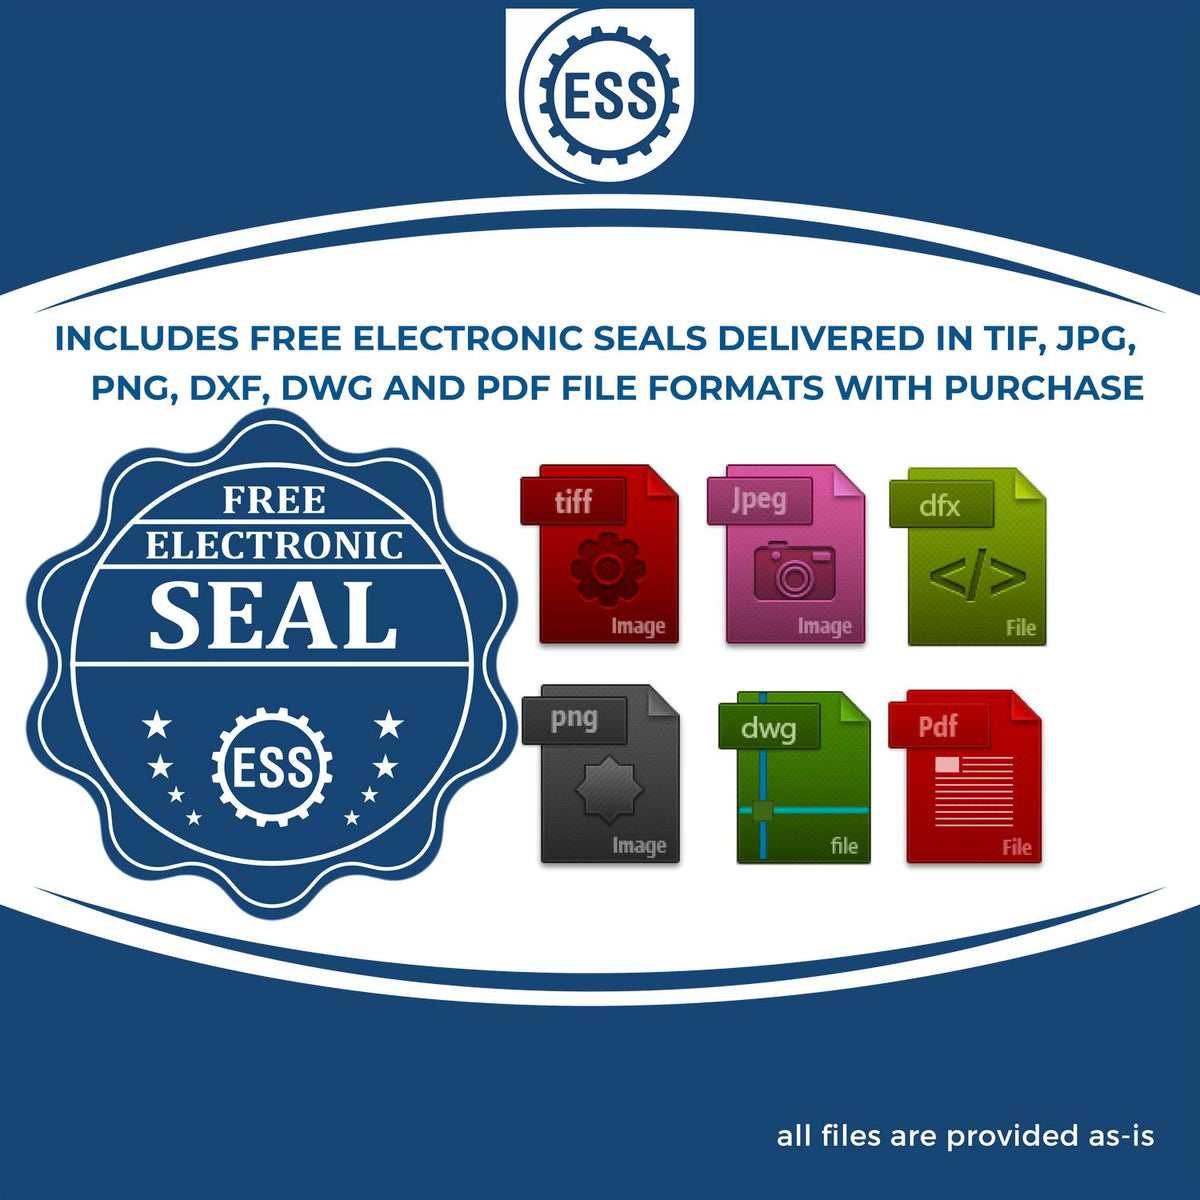 An infographic for the free electronic seal for the State of Texas Extended Long Reach Engineer Seal illustrating the different file type icons such as DXF, DWG, TIF, JPG and PNG.